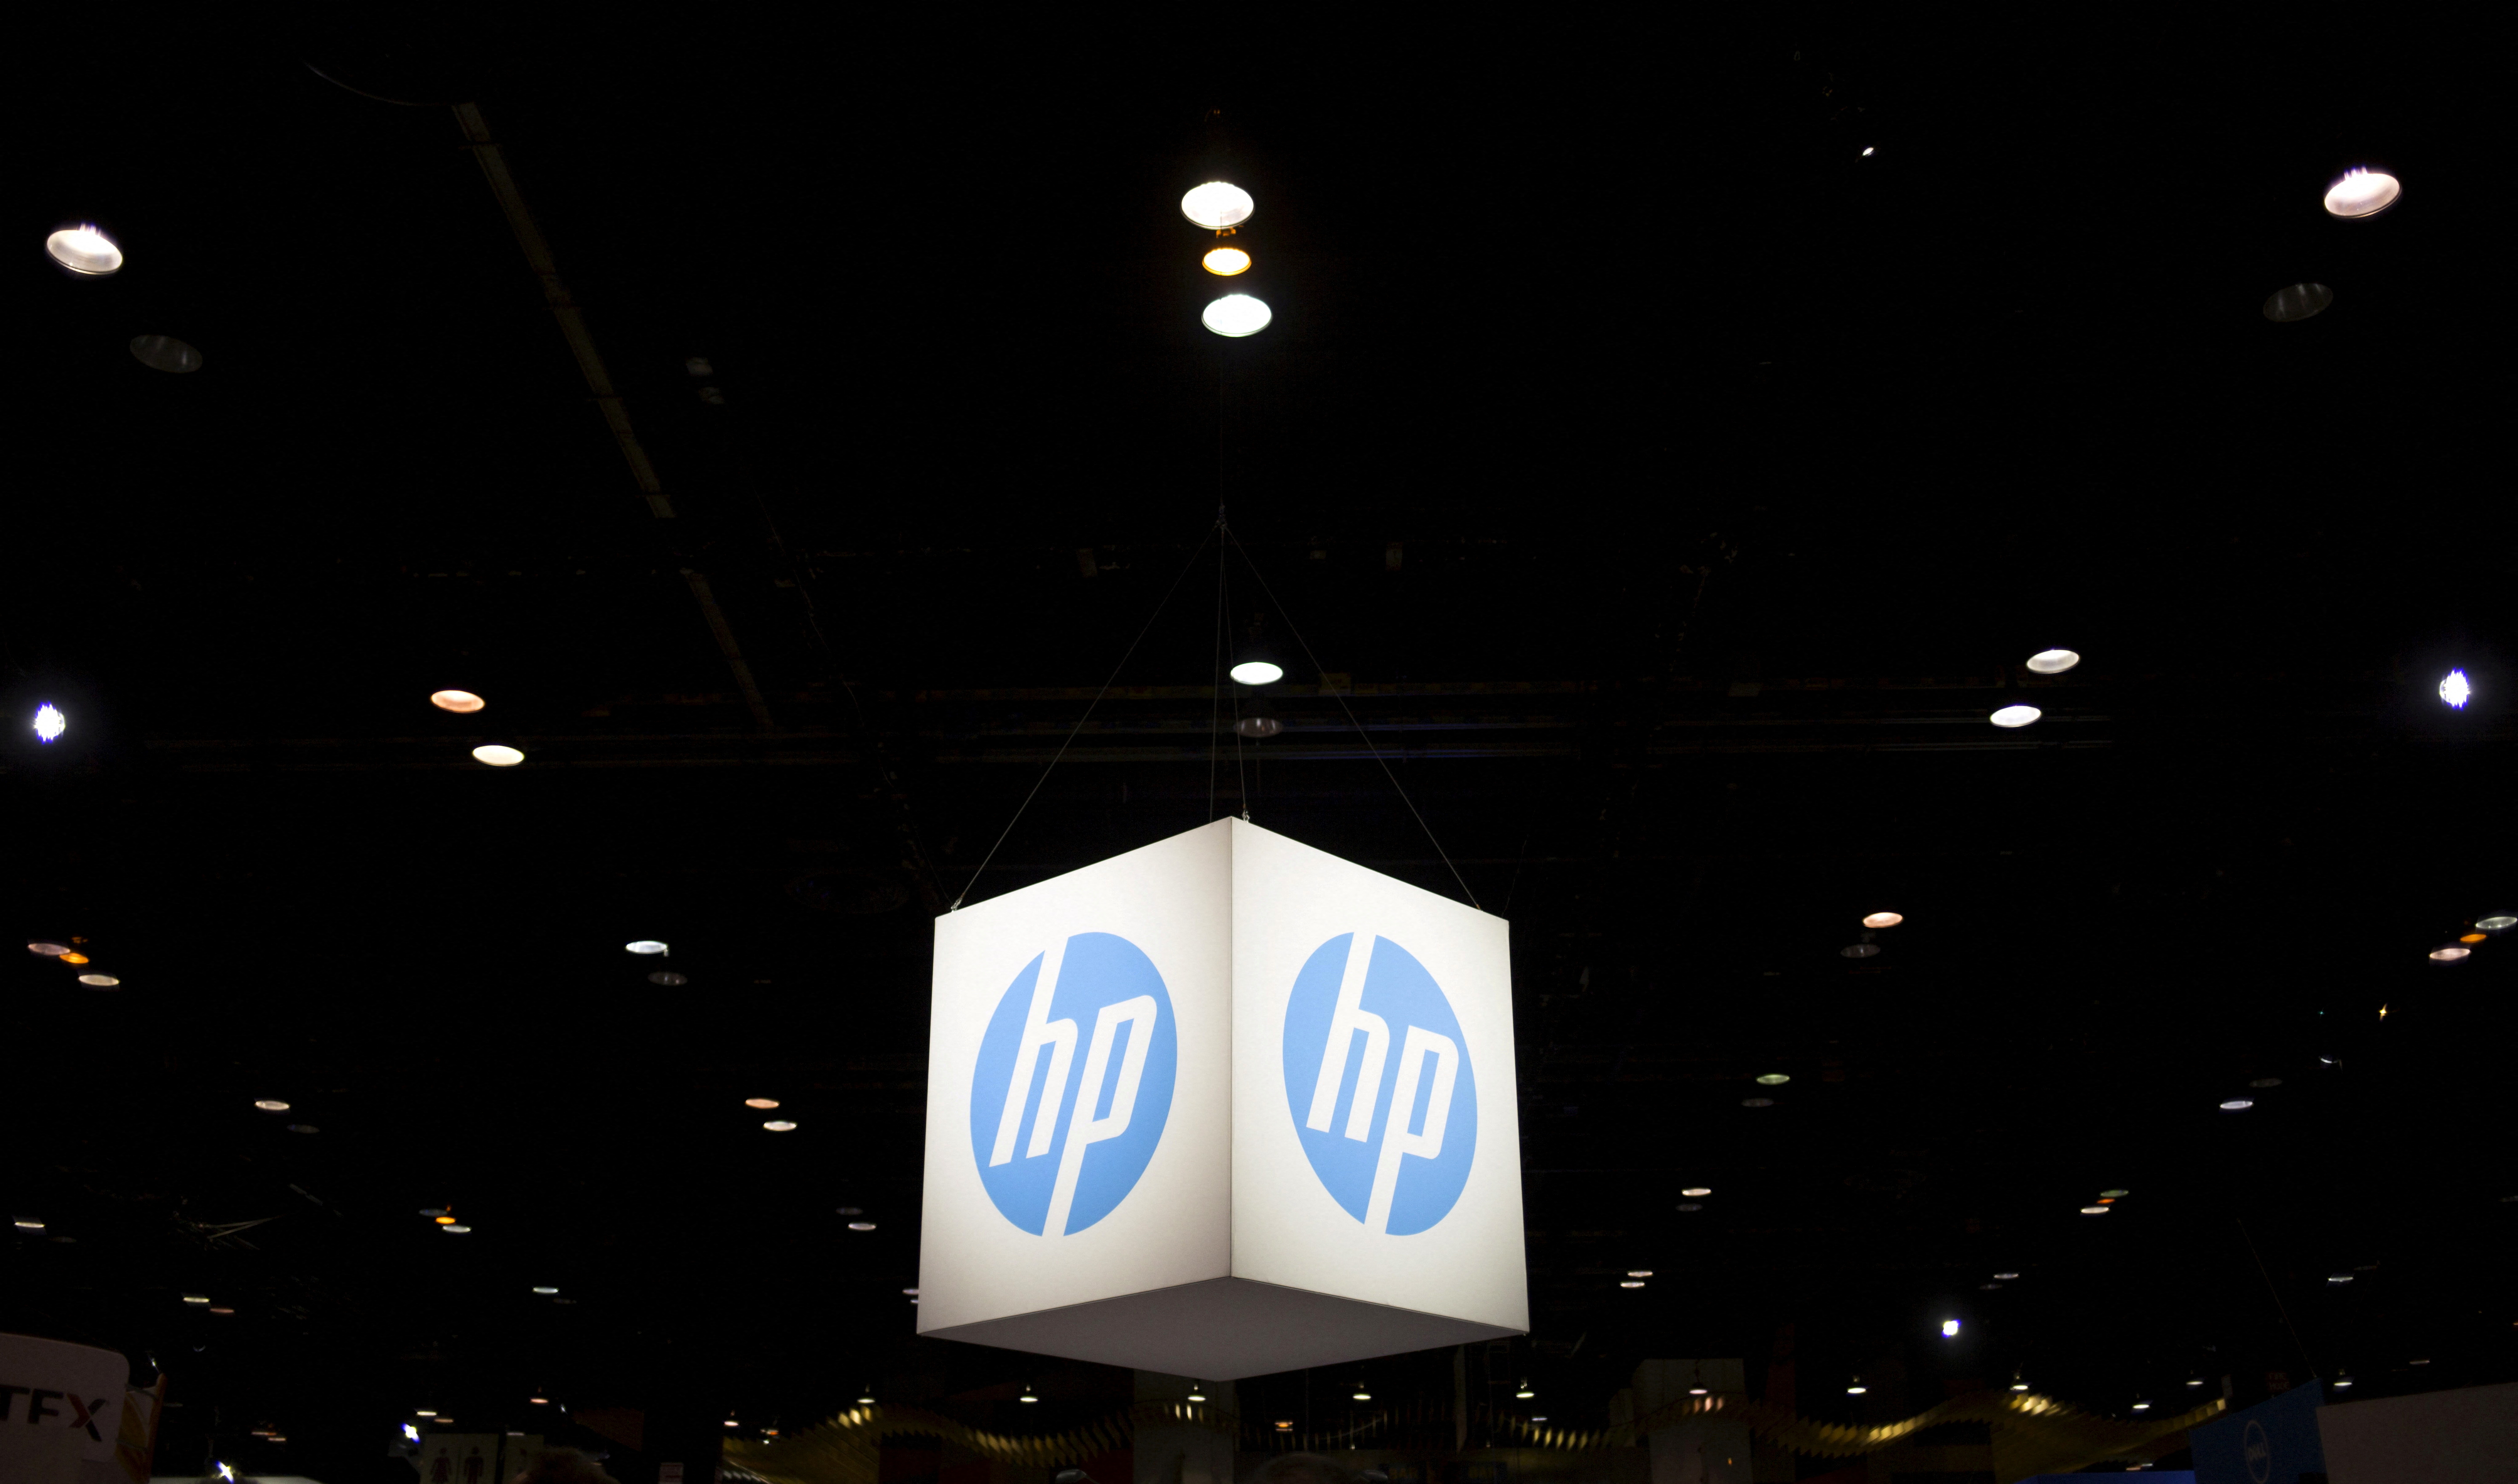 The Hewlett-Packard (HP) logo is seen as part of a display at the Microsoft Ignite technology conference in Chicago